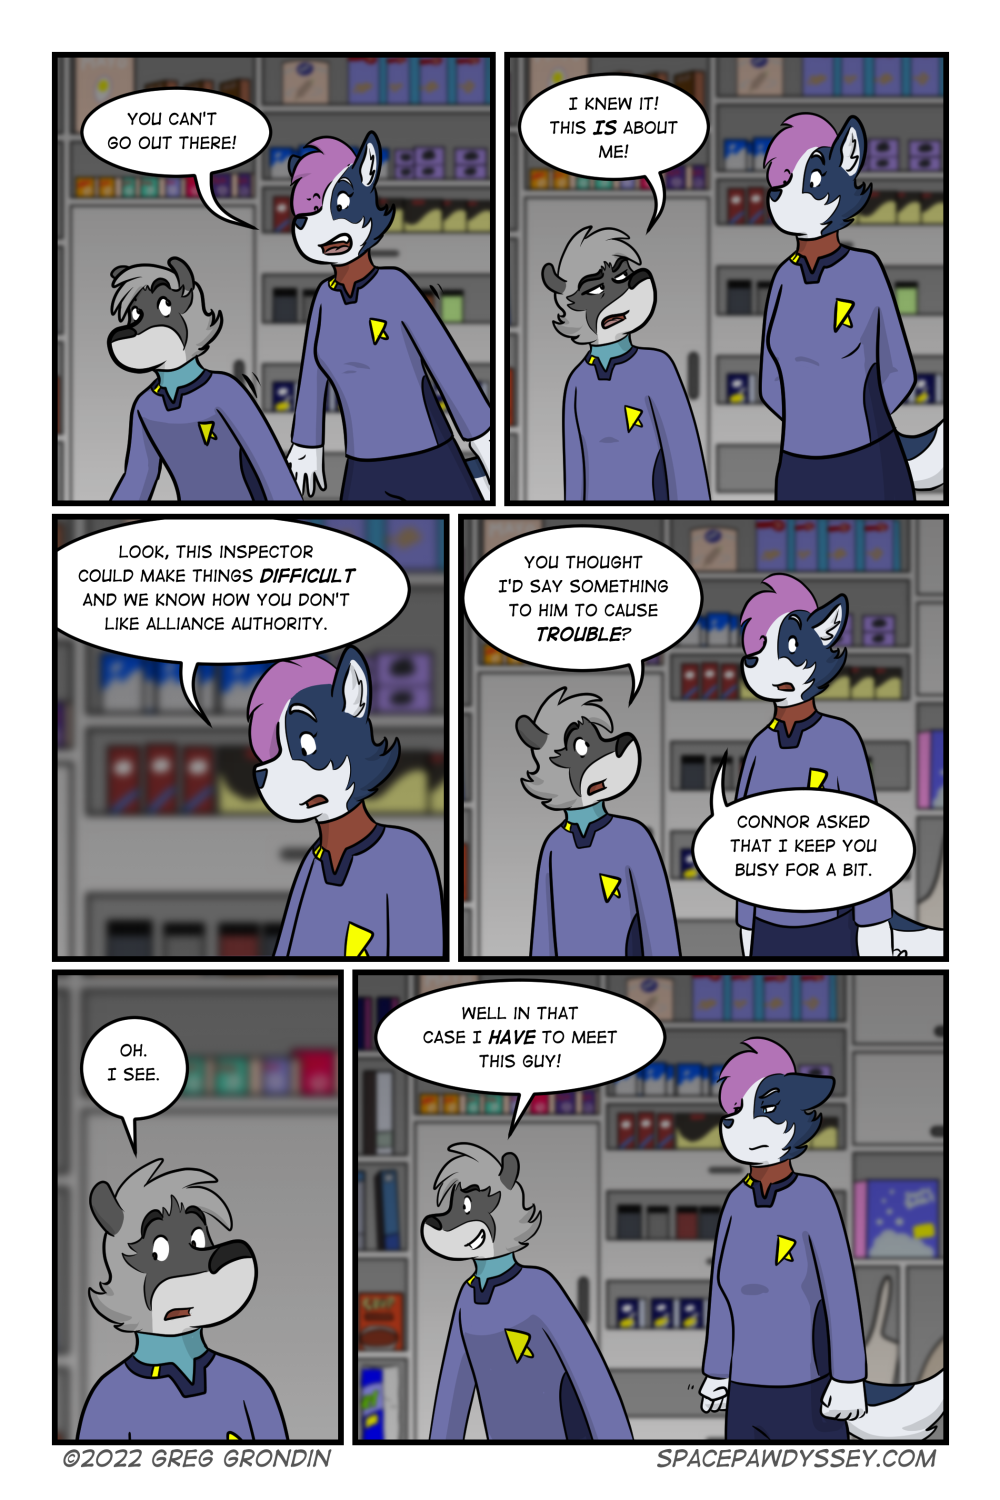 Space Pawdyssey #529